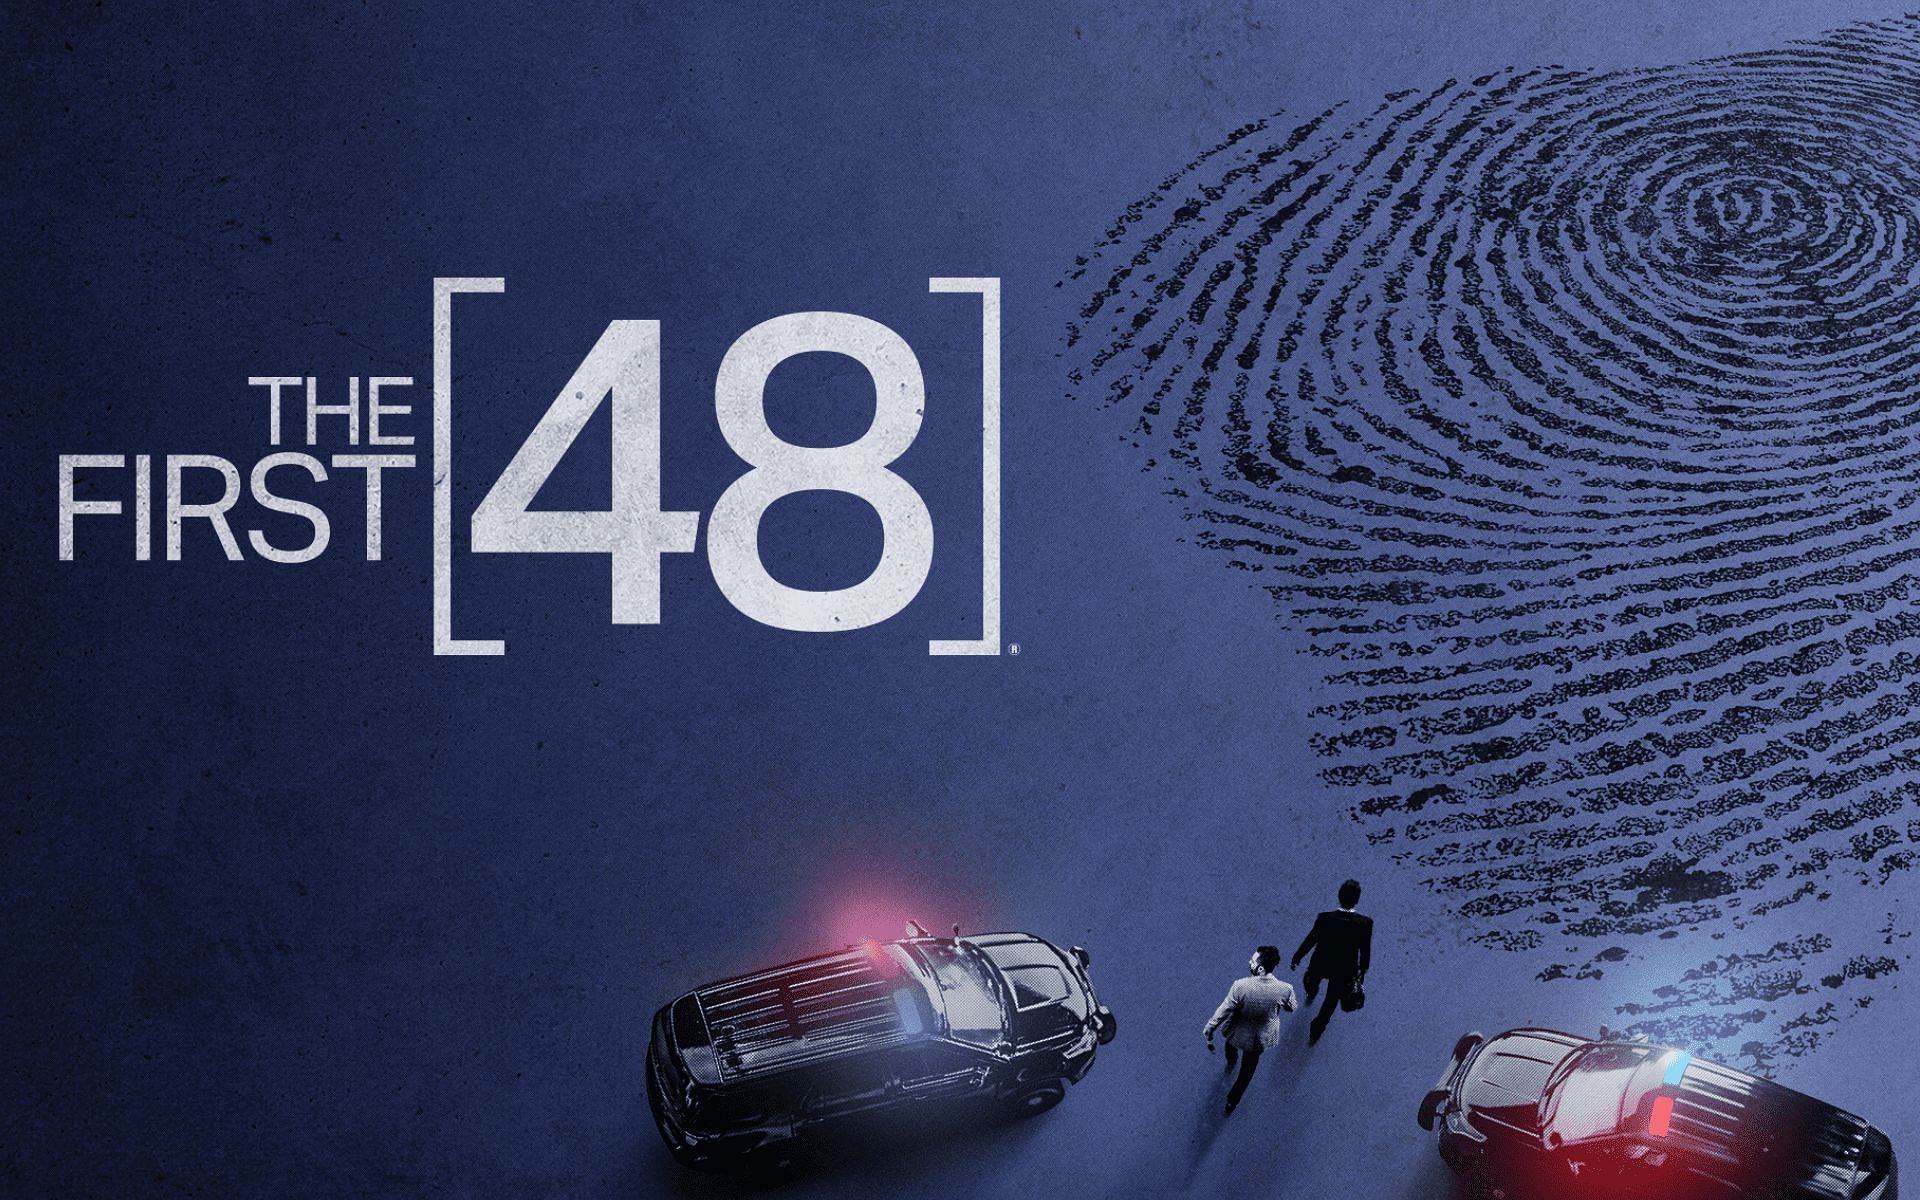 The upcoming episode of The First 48 focuses on the homicide of brothers Darius Myles and Christopher Smith (Image via IMDb)